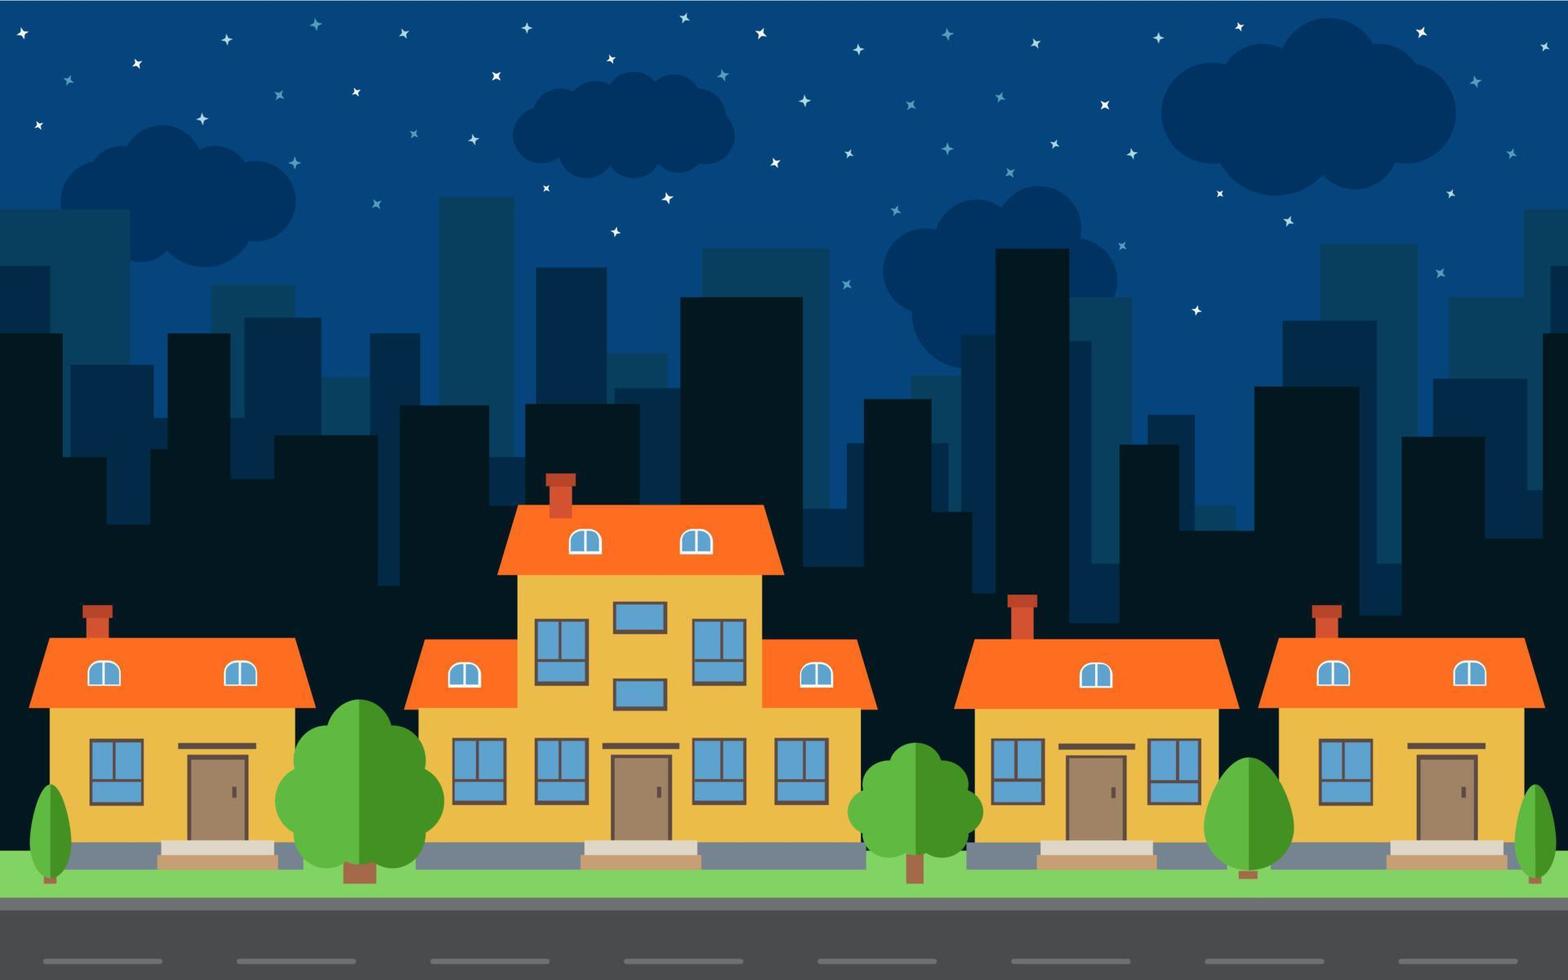 Vector night city with cartoon houses and buildings. City space with road on flat style background concept. Summer urban landscape. Street view with cityscape on a background